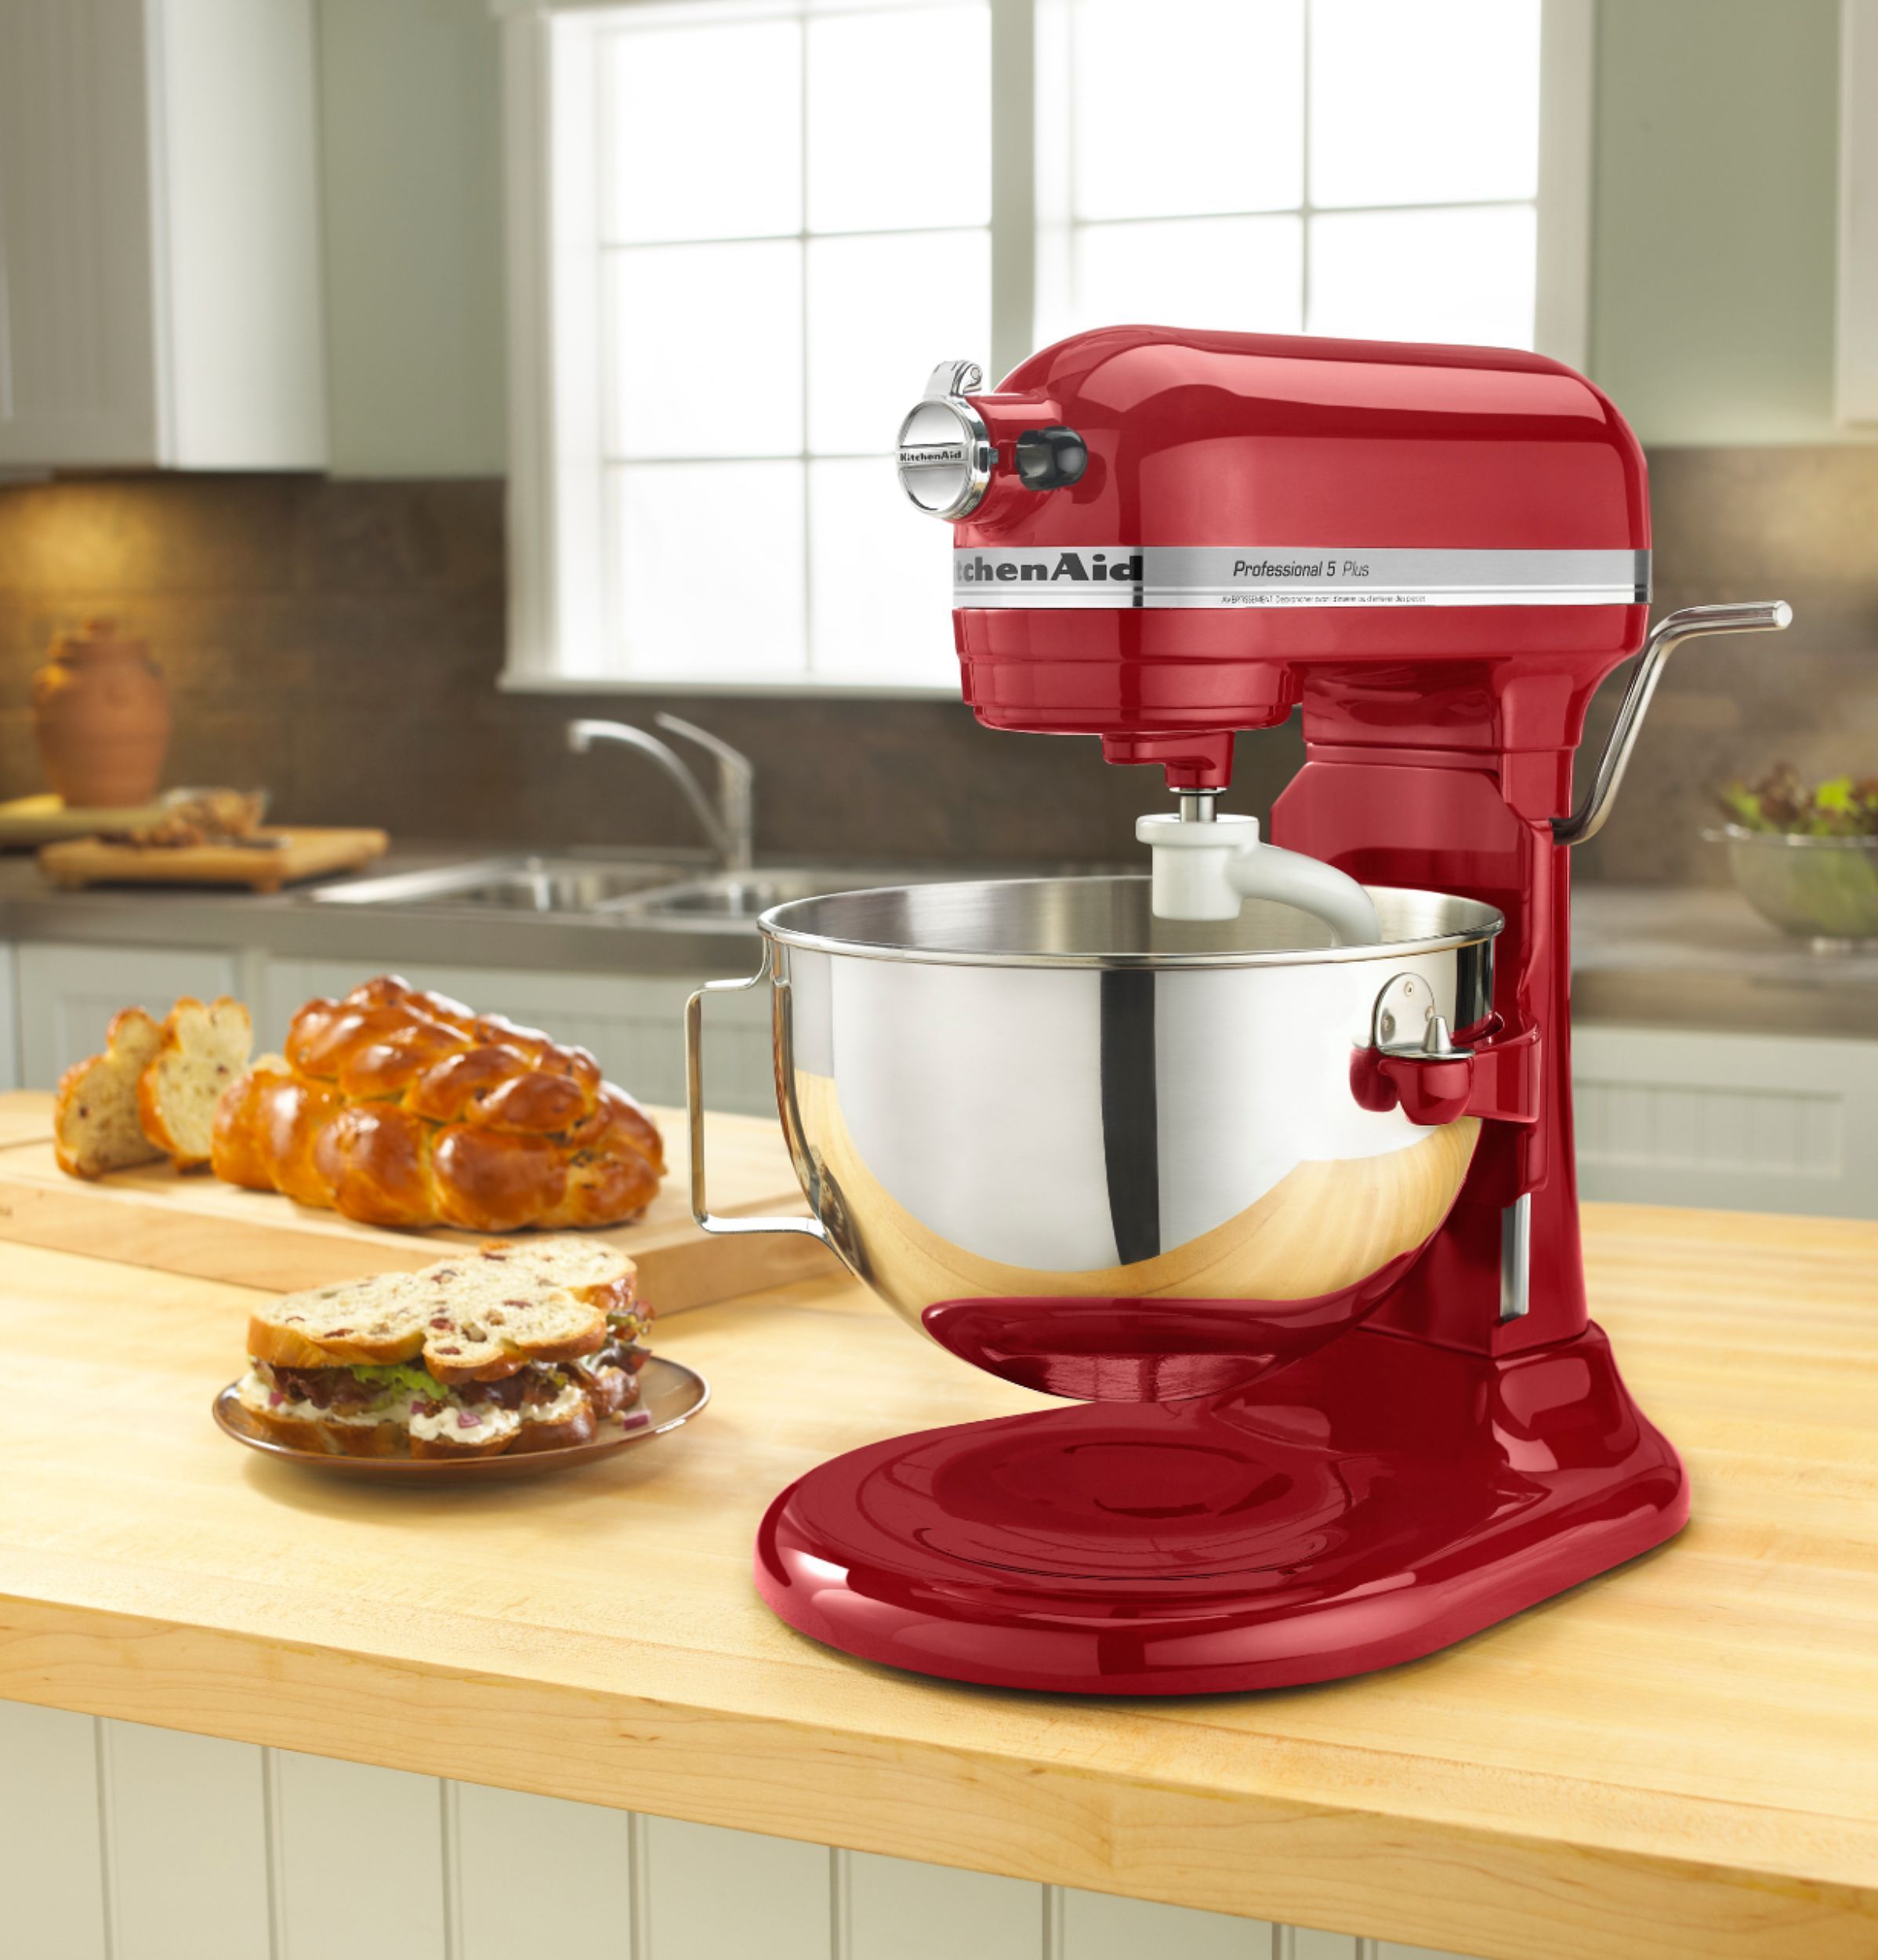 This KitchenAid Stand Mixer Is on Sale for $200 Off